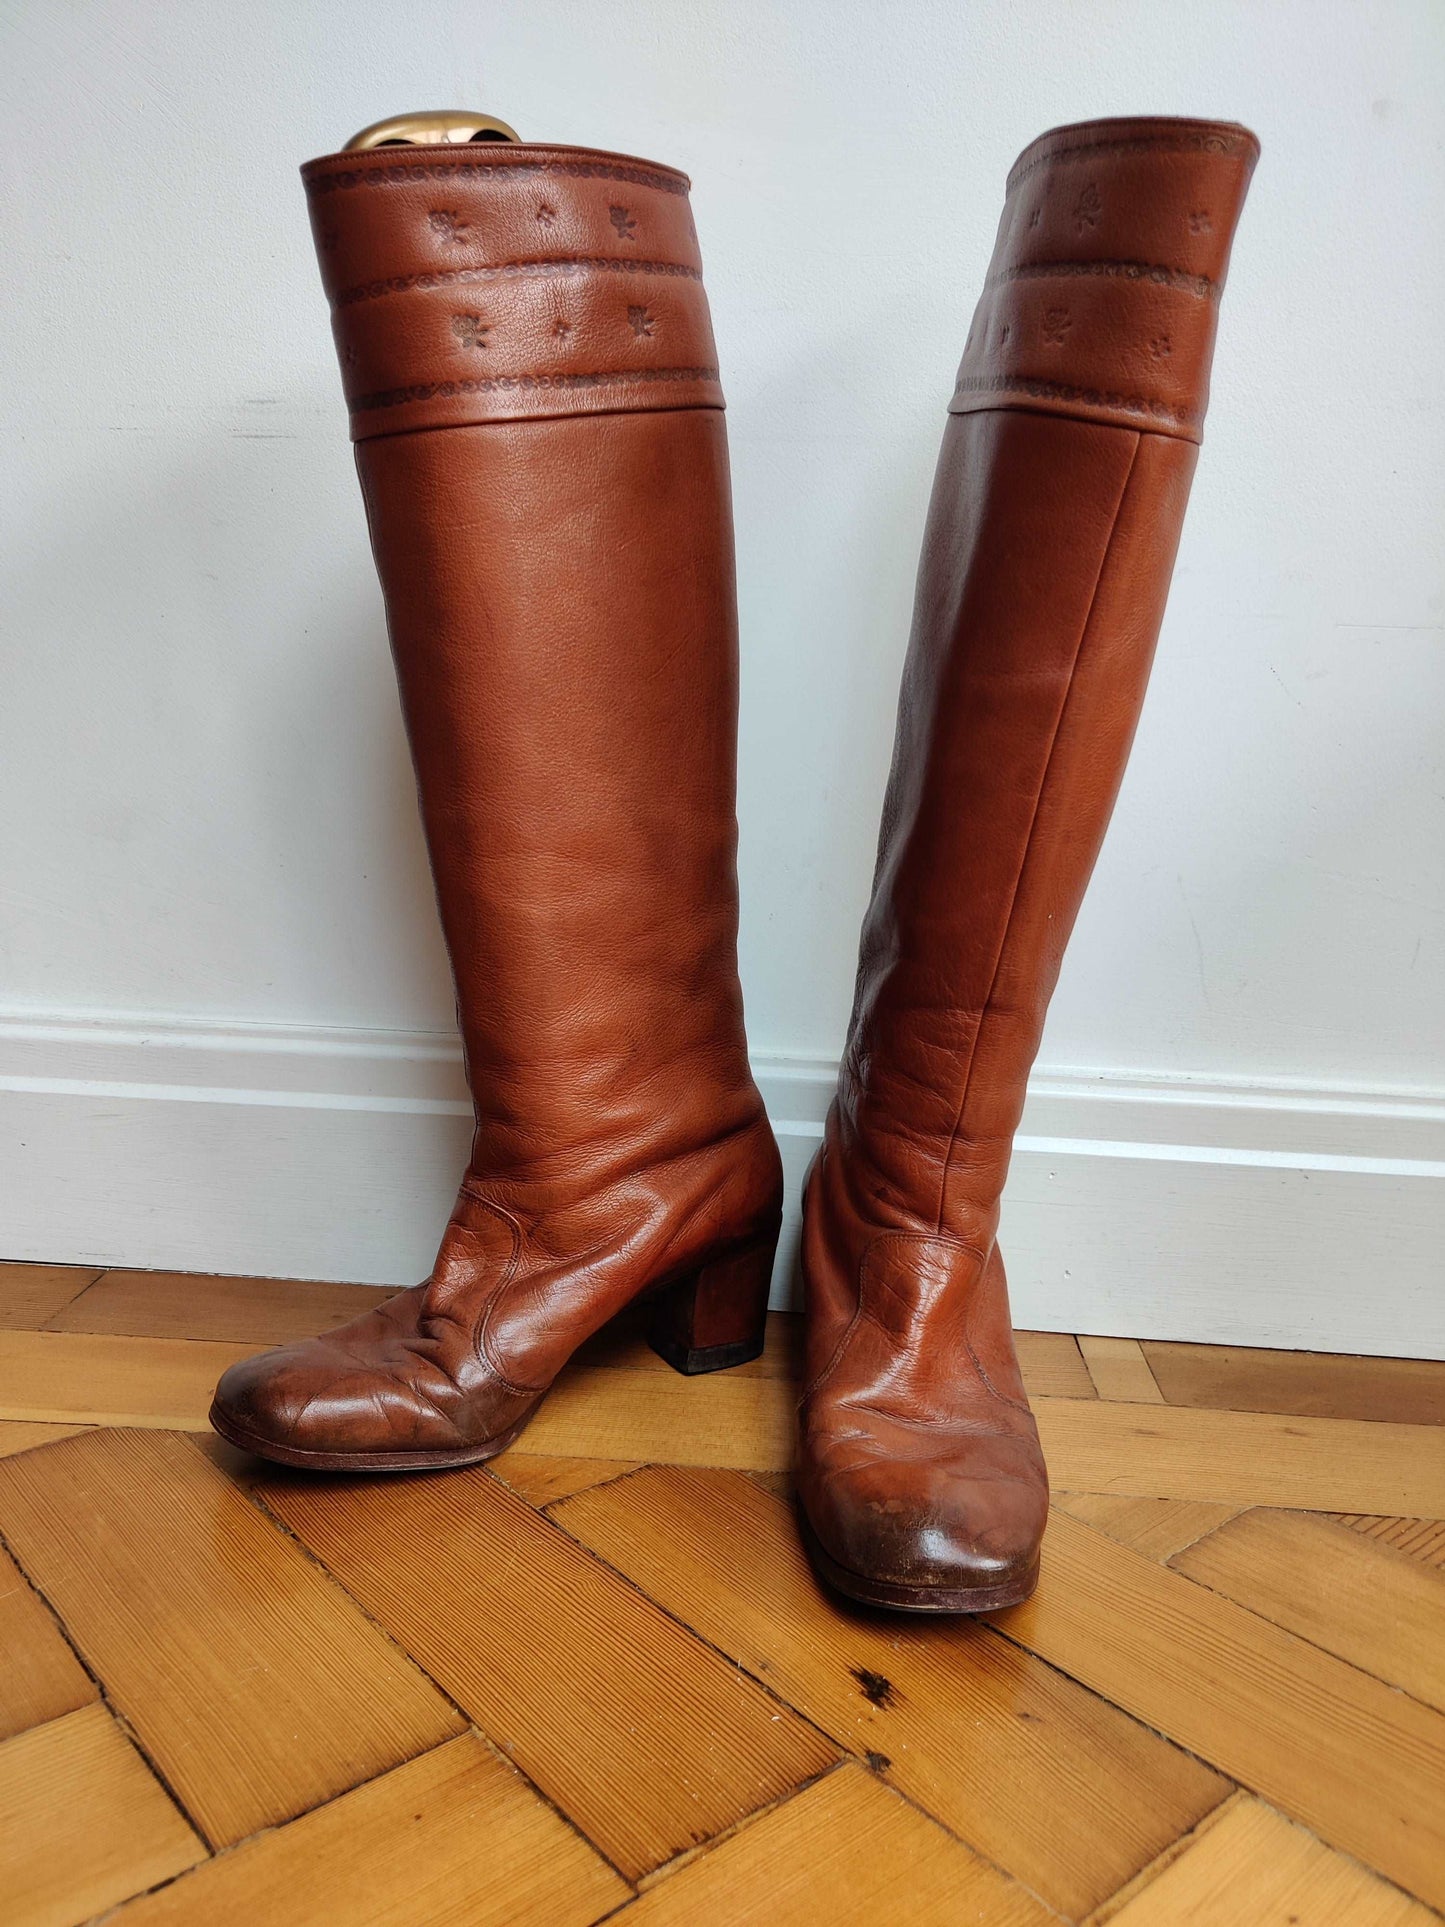 Stunning tan leather knee high boots